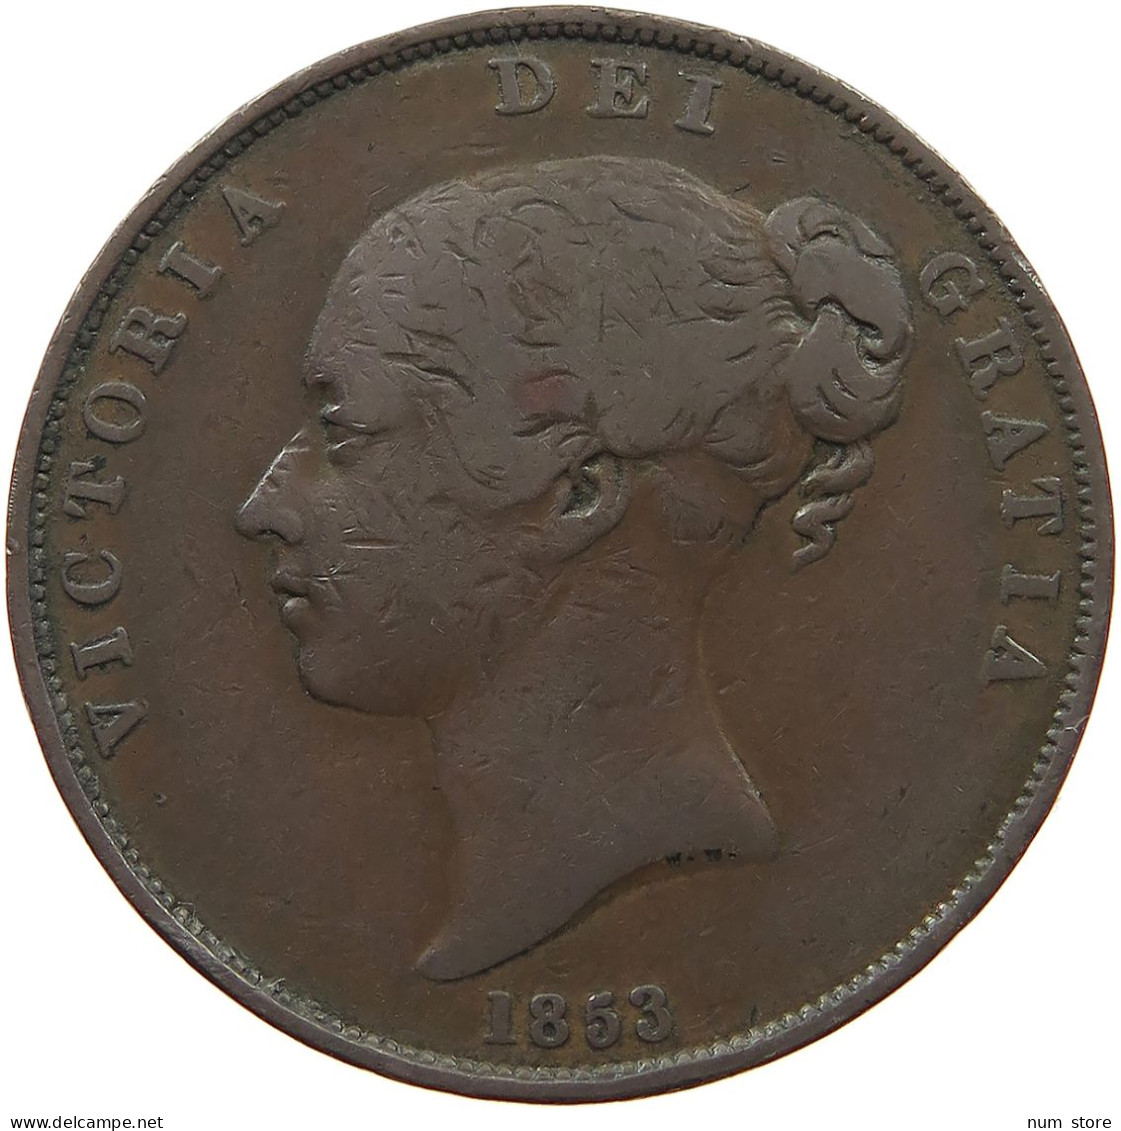 GREAT BRITAIN PENNY 1853 Victoria 1837-1901 #t100 0373 - D. 1 Penny